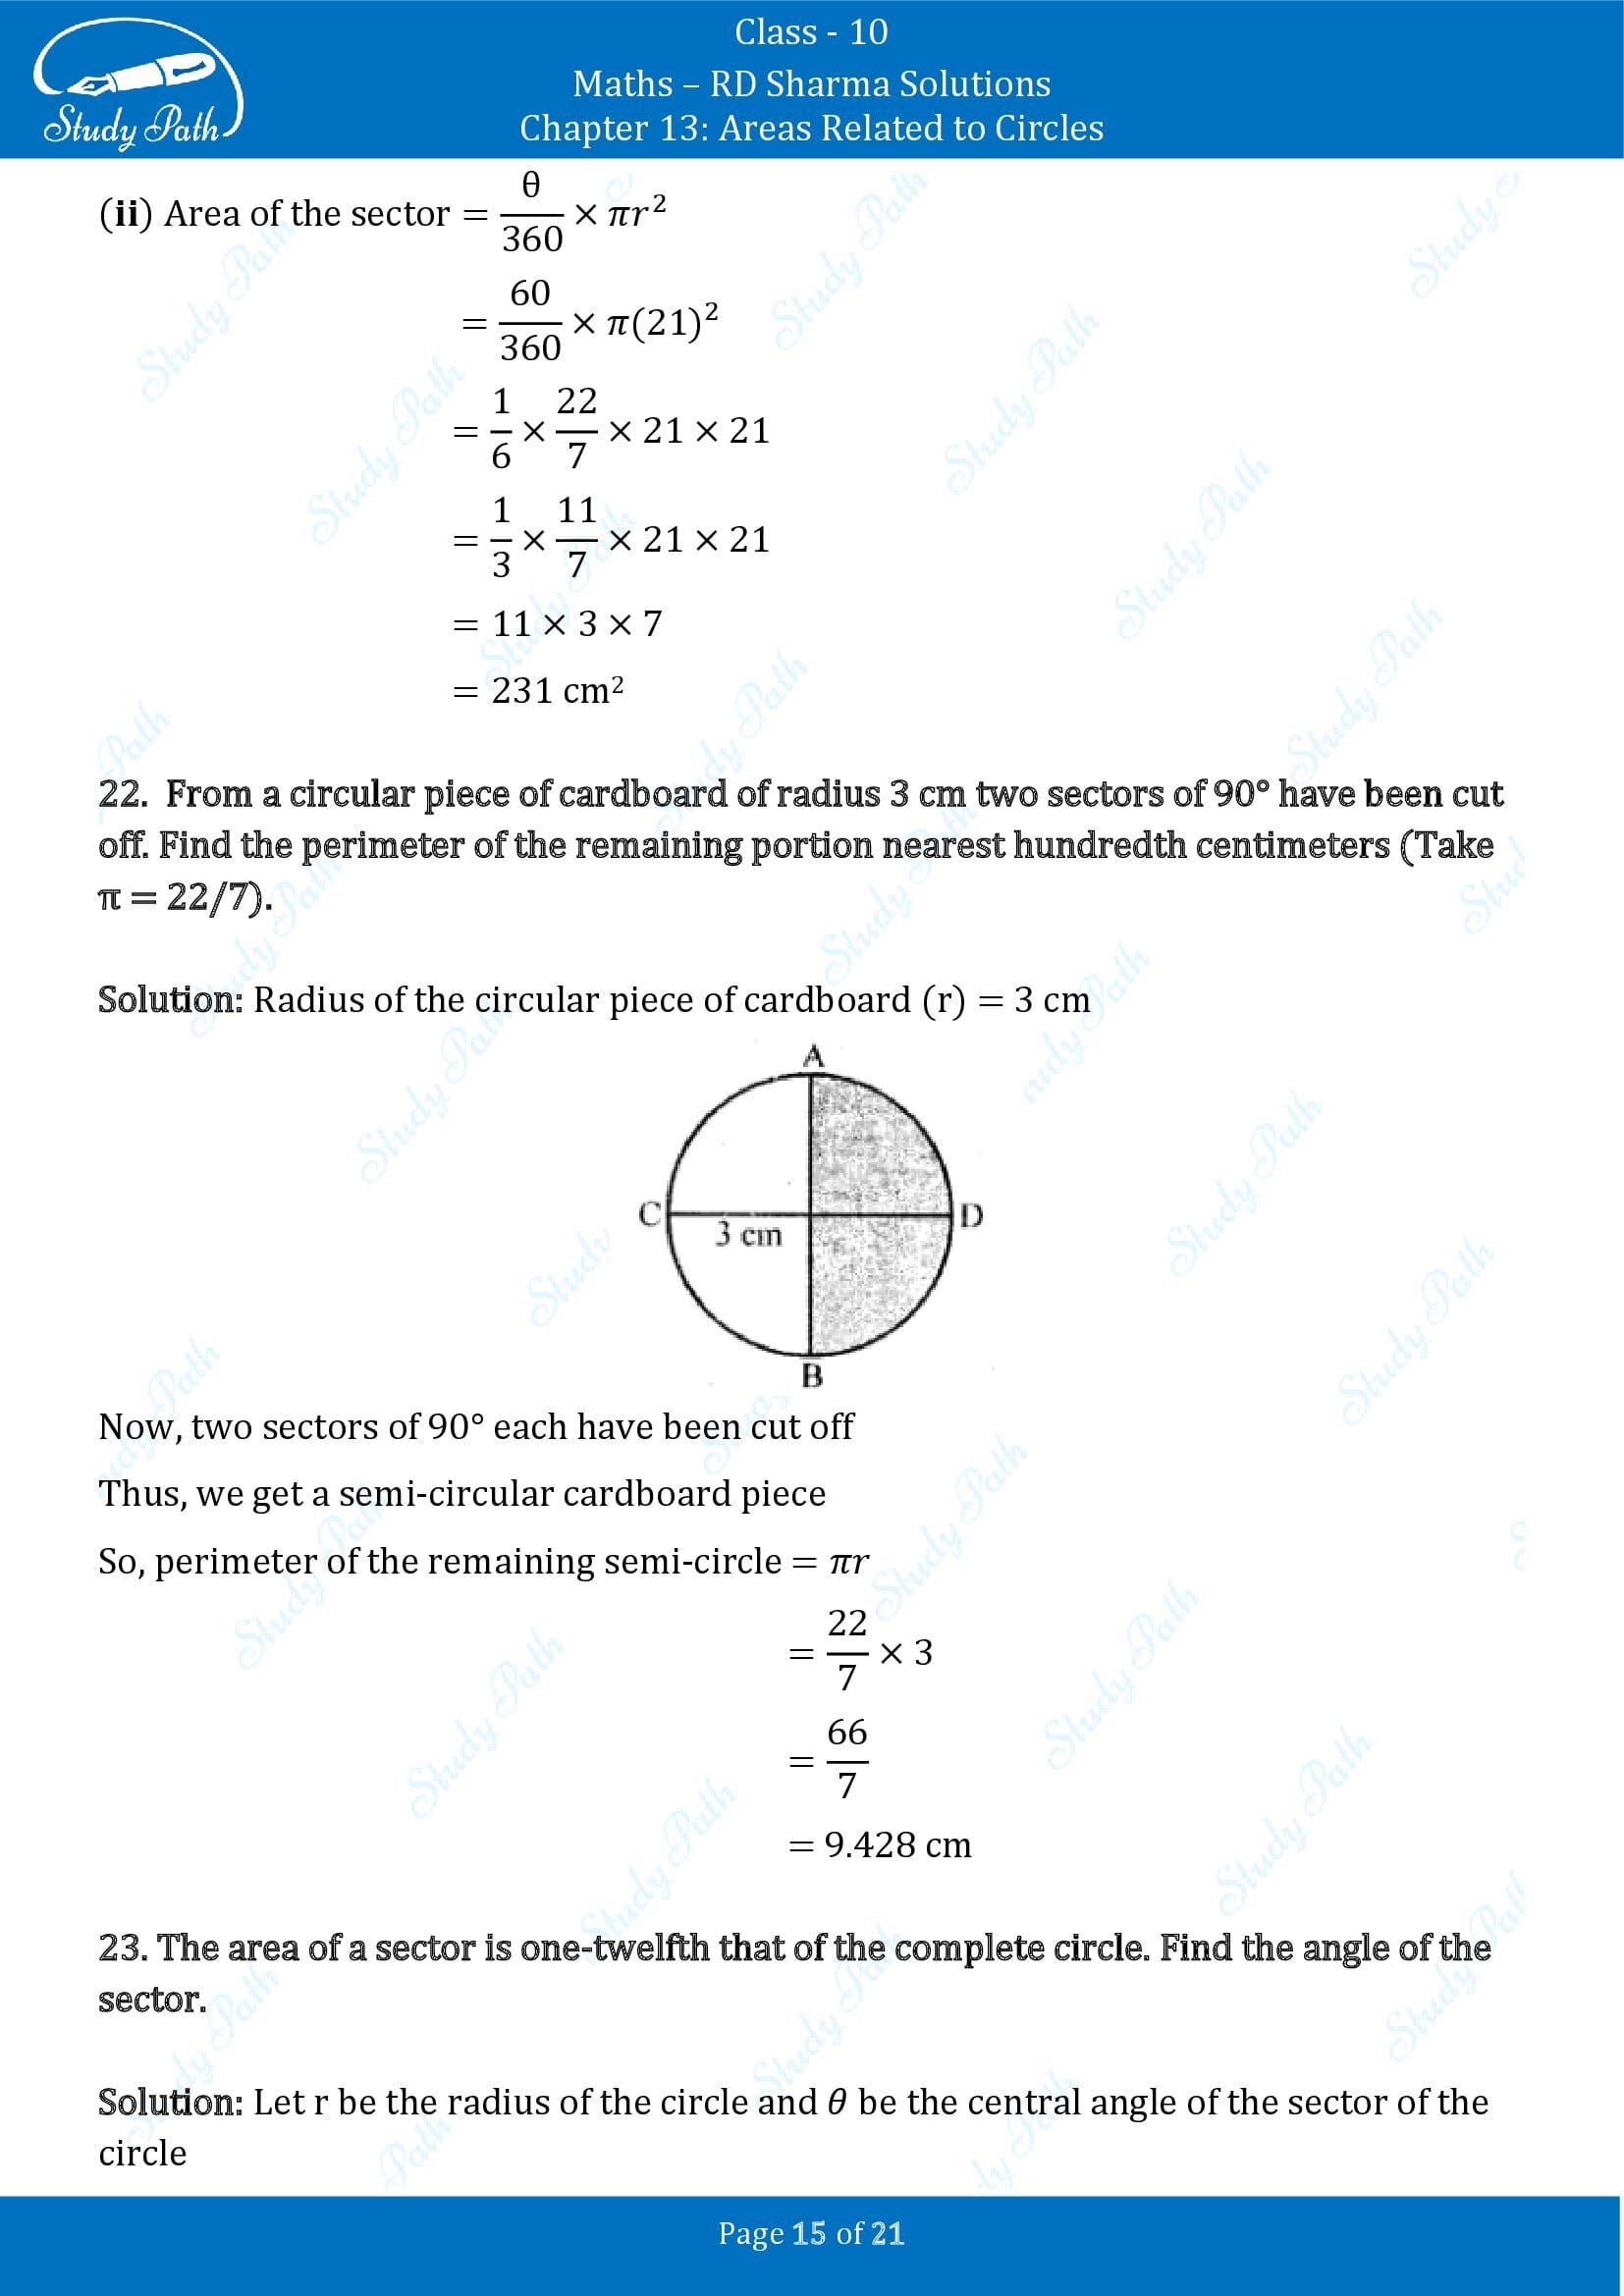 RD Sharma Solutions Class 10 Chapter 13 Areas Related to Circles Exercise 13.2 00015